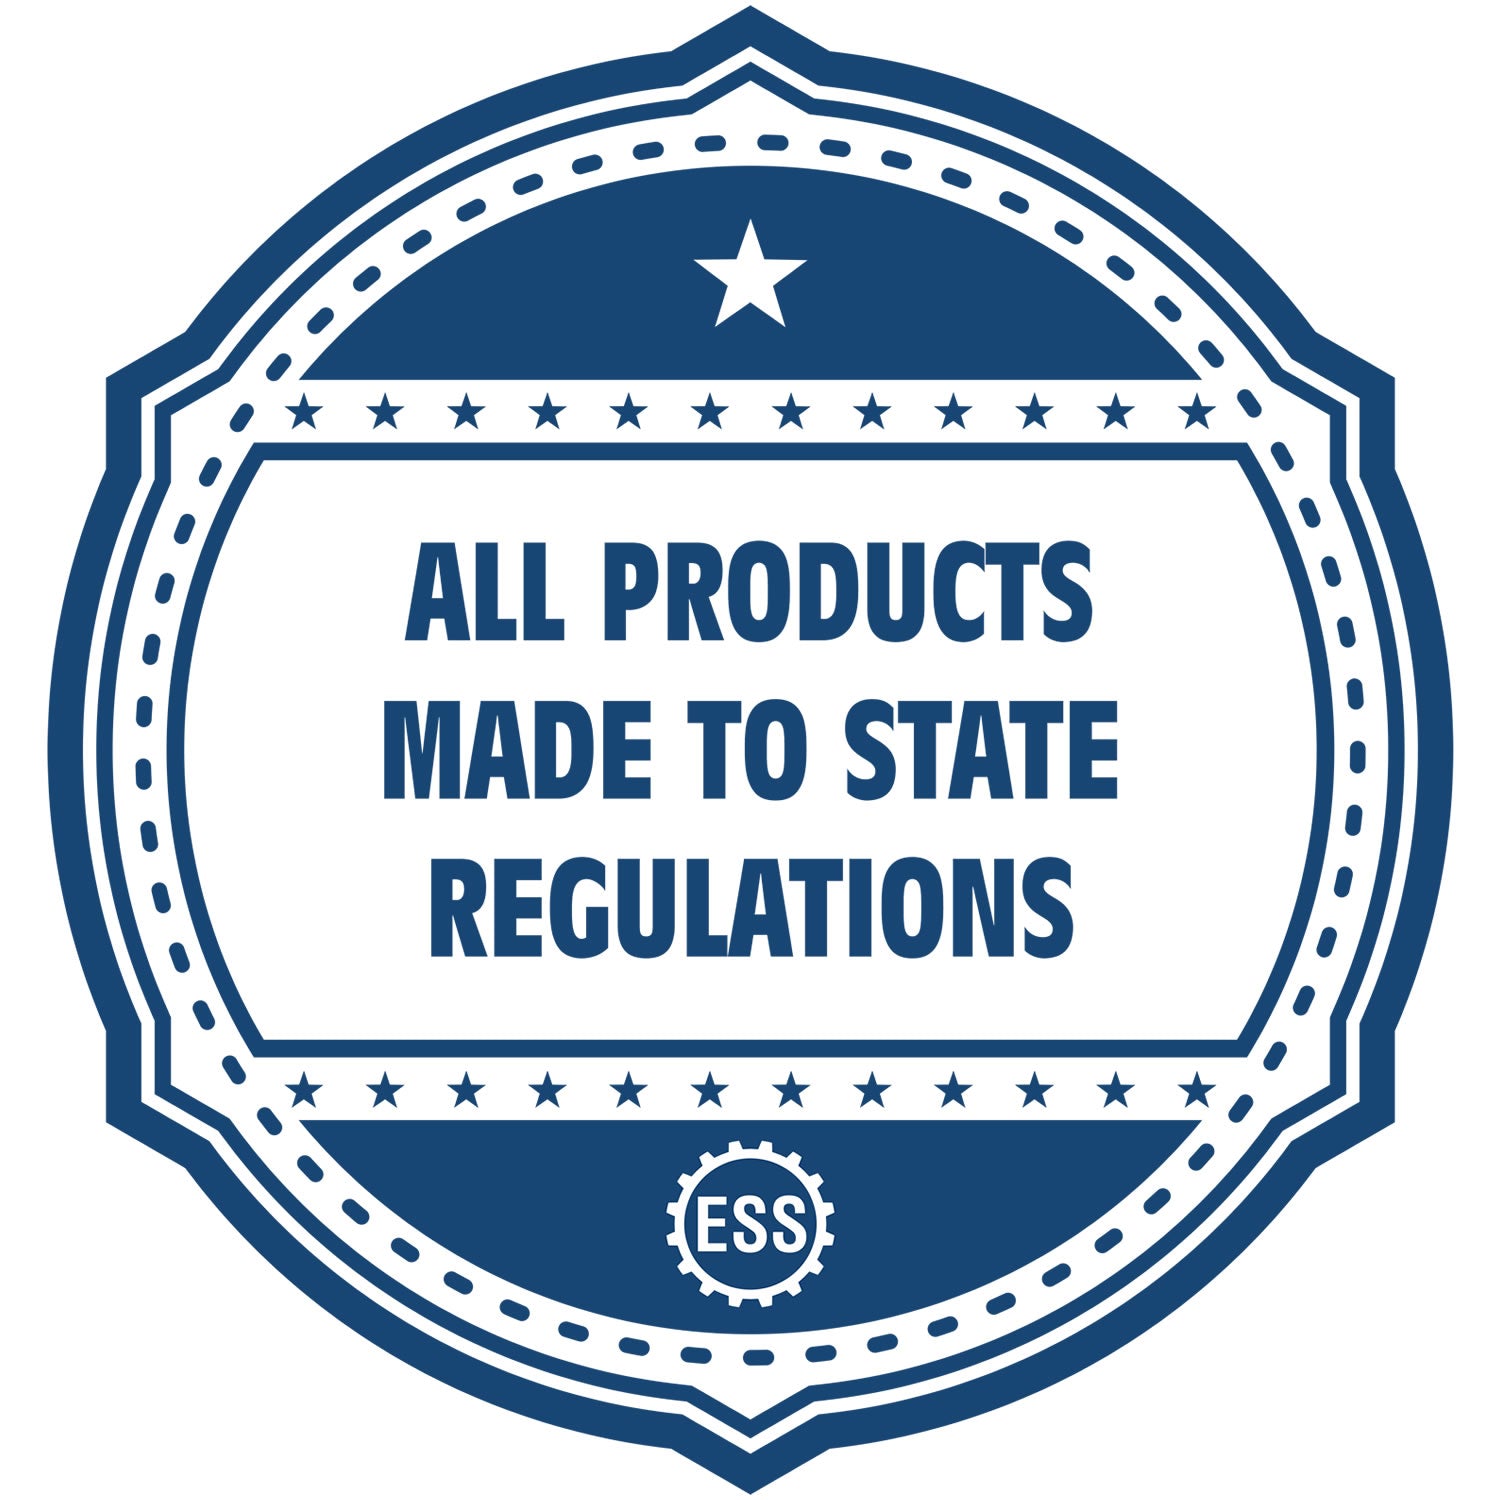 An icon or badge element for the Colorado Engineer Desk Seal showing that this product is made in compliance with state regulations.